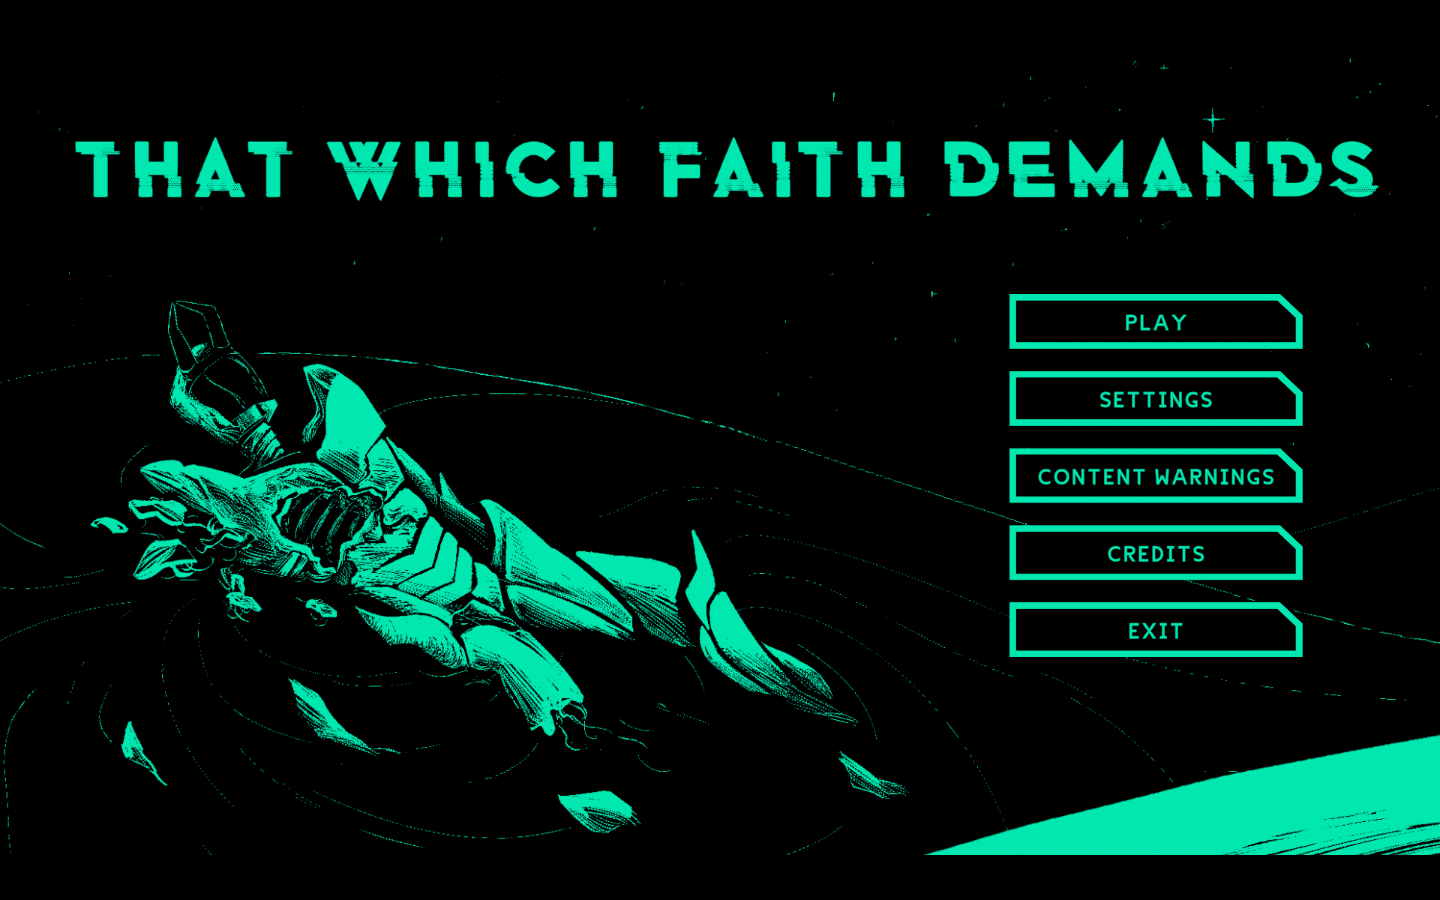 That Which Faith Demands title screen showing the body of one of the gods next to the game menu